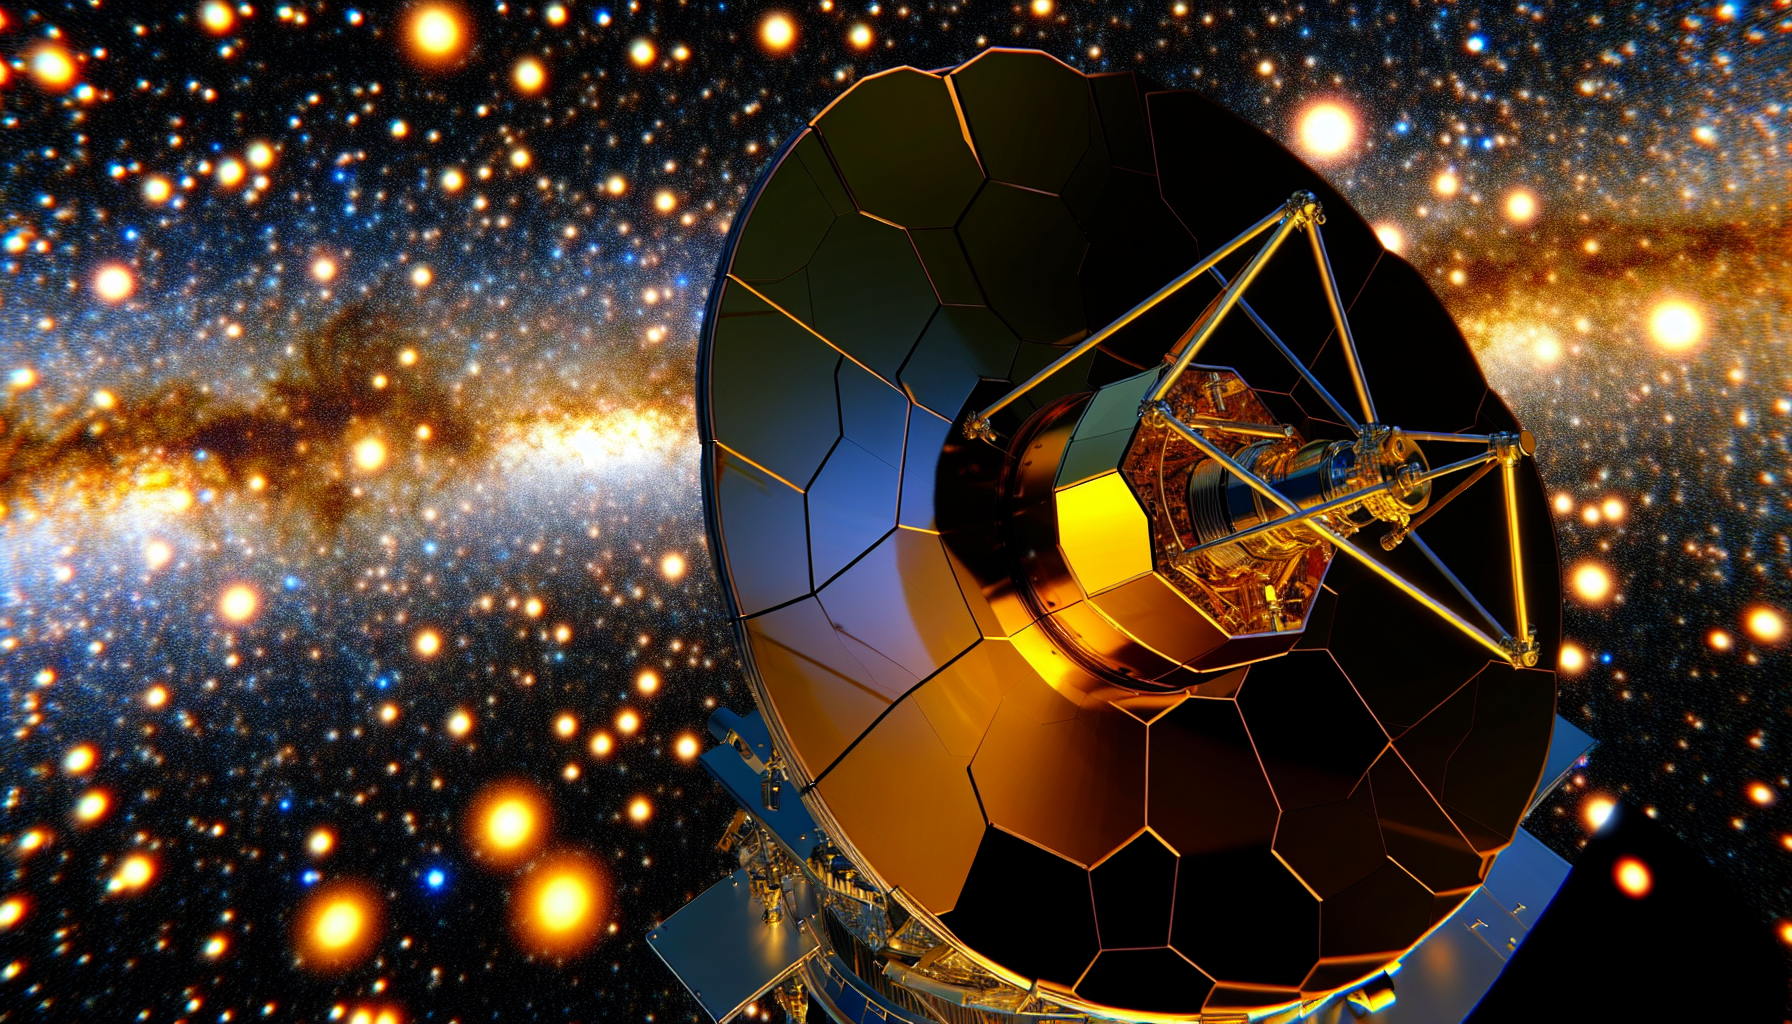 The James Webb Space Telescope capturing the light of distant stars and galaxies